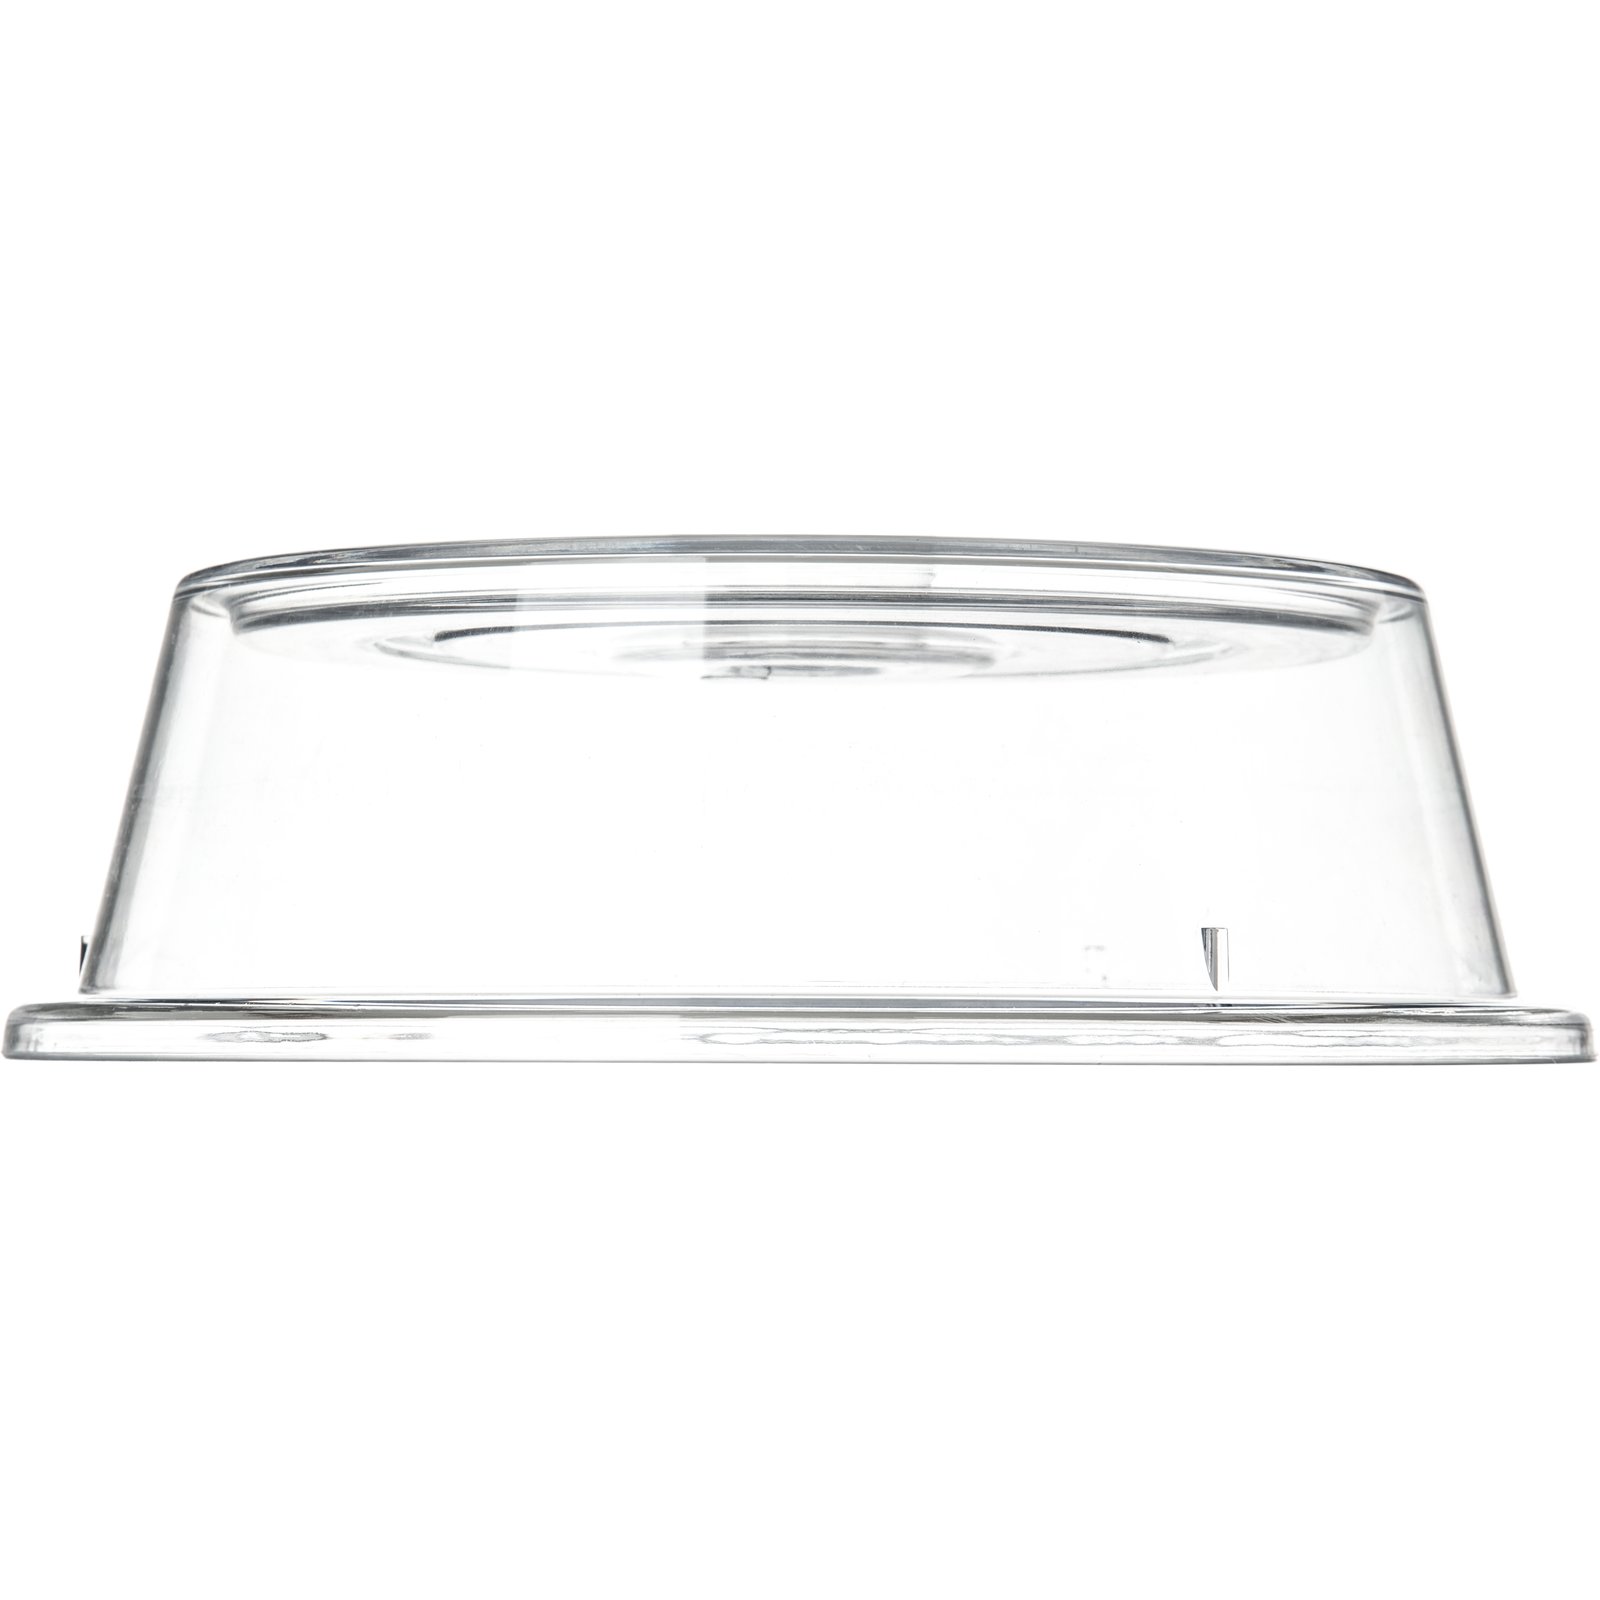 Plate Covers  Carlisle FoodService Products